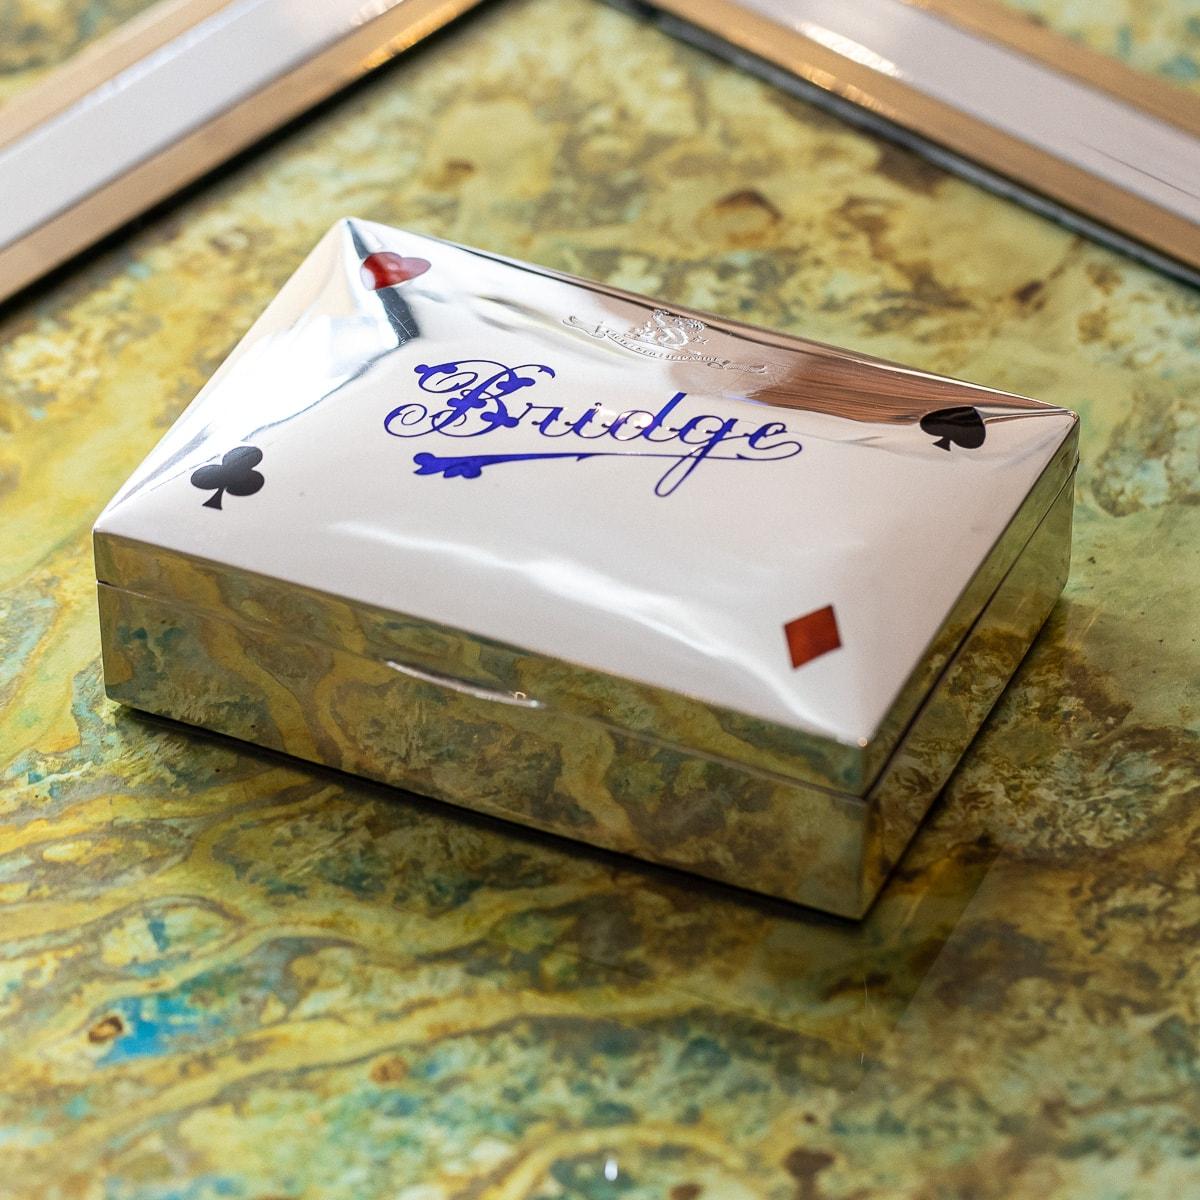 Antique early-20th century Edwardian solid silver & enamel bridge gaming box, the plain silver box applied to the lid with a stylised Bridge writing and card suits, inside lined with leather and engraved with a crest 'CAUTE SED IMPAVIDE' - The